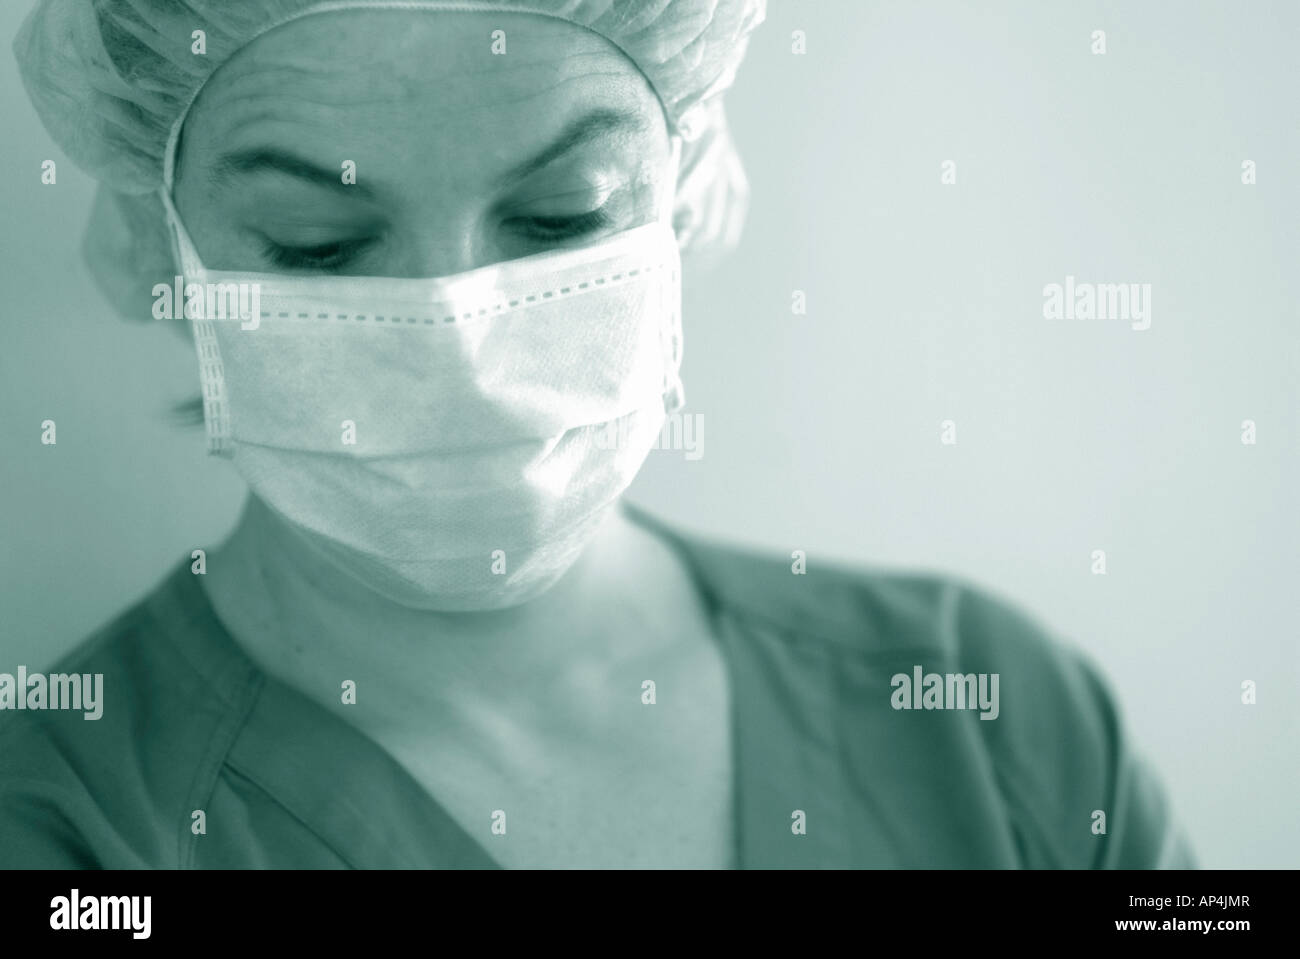 Doctor with protective mask Stock Photo